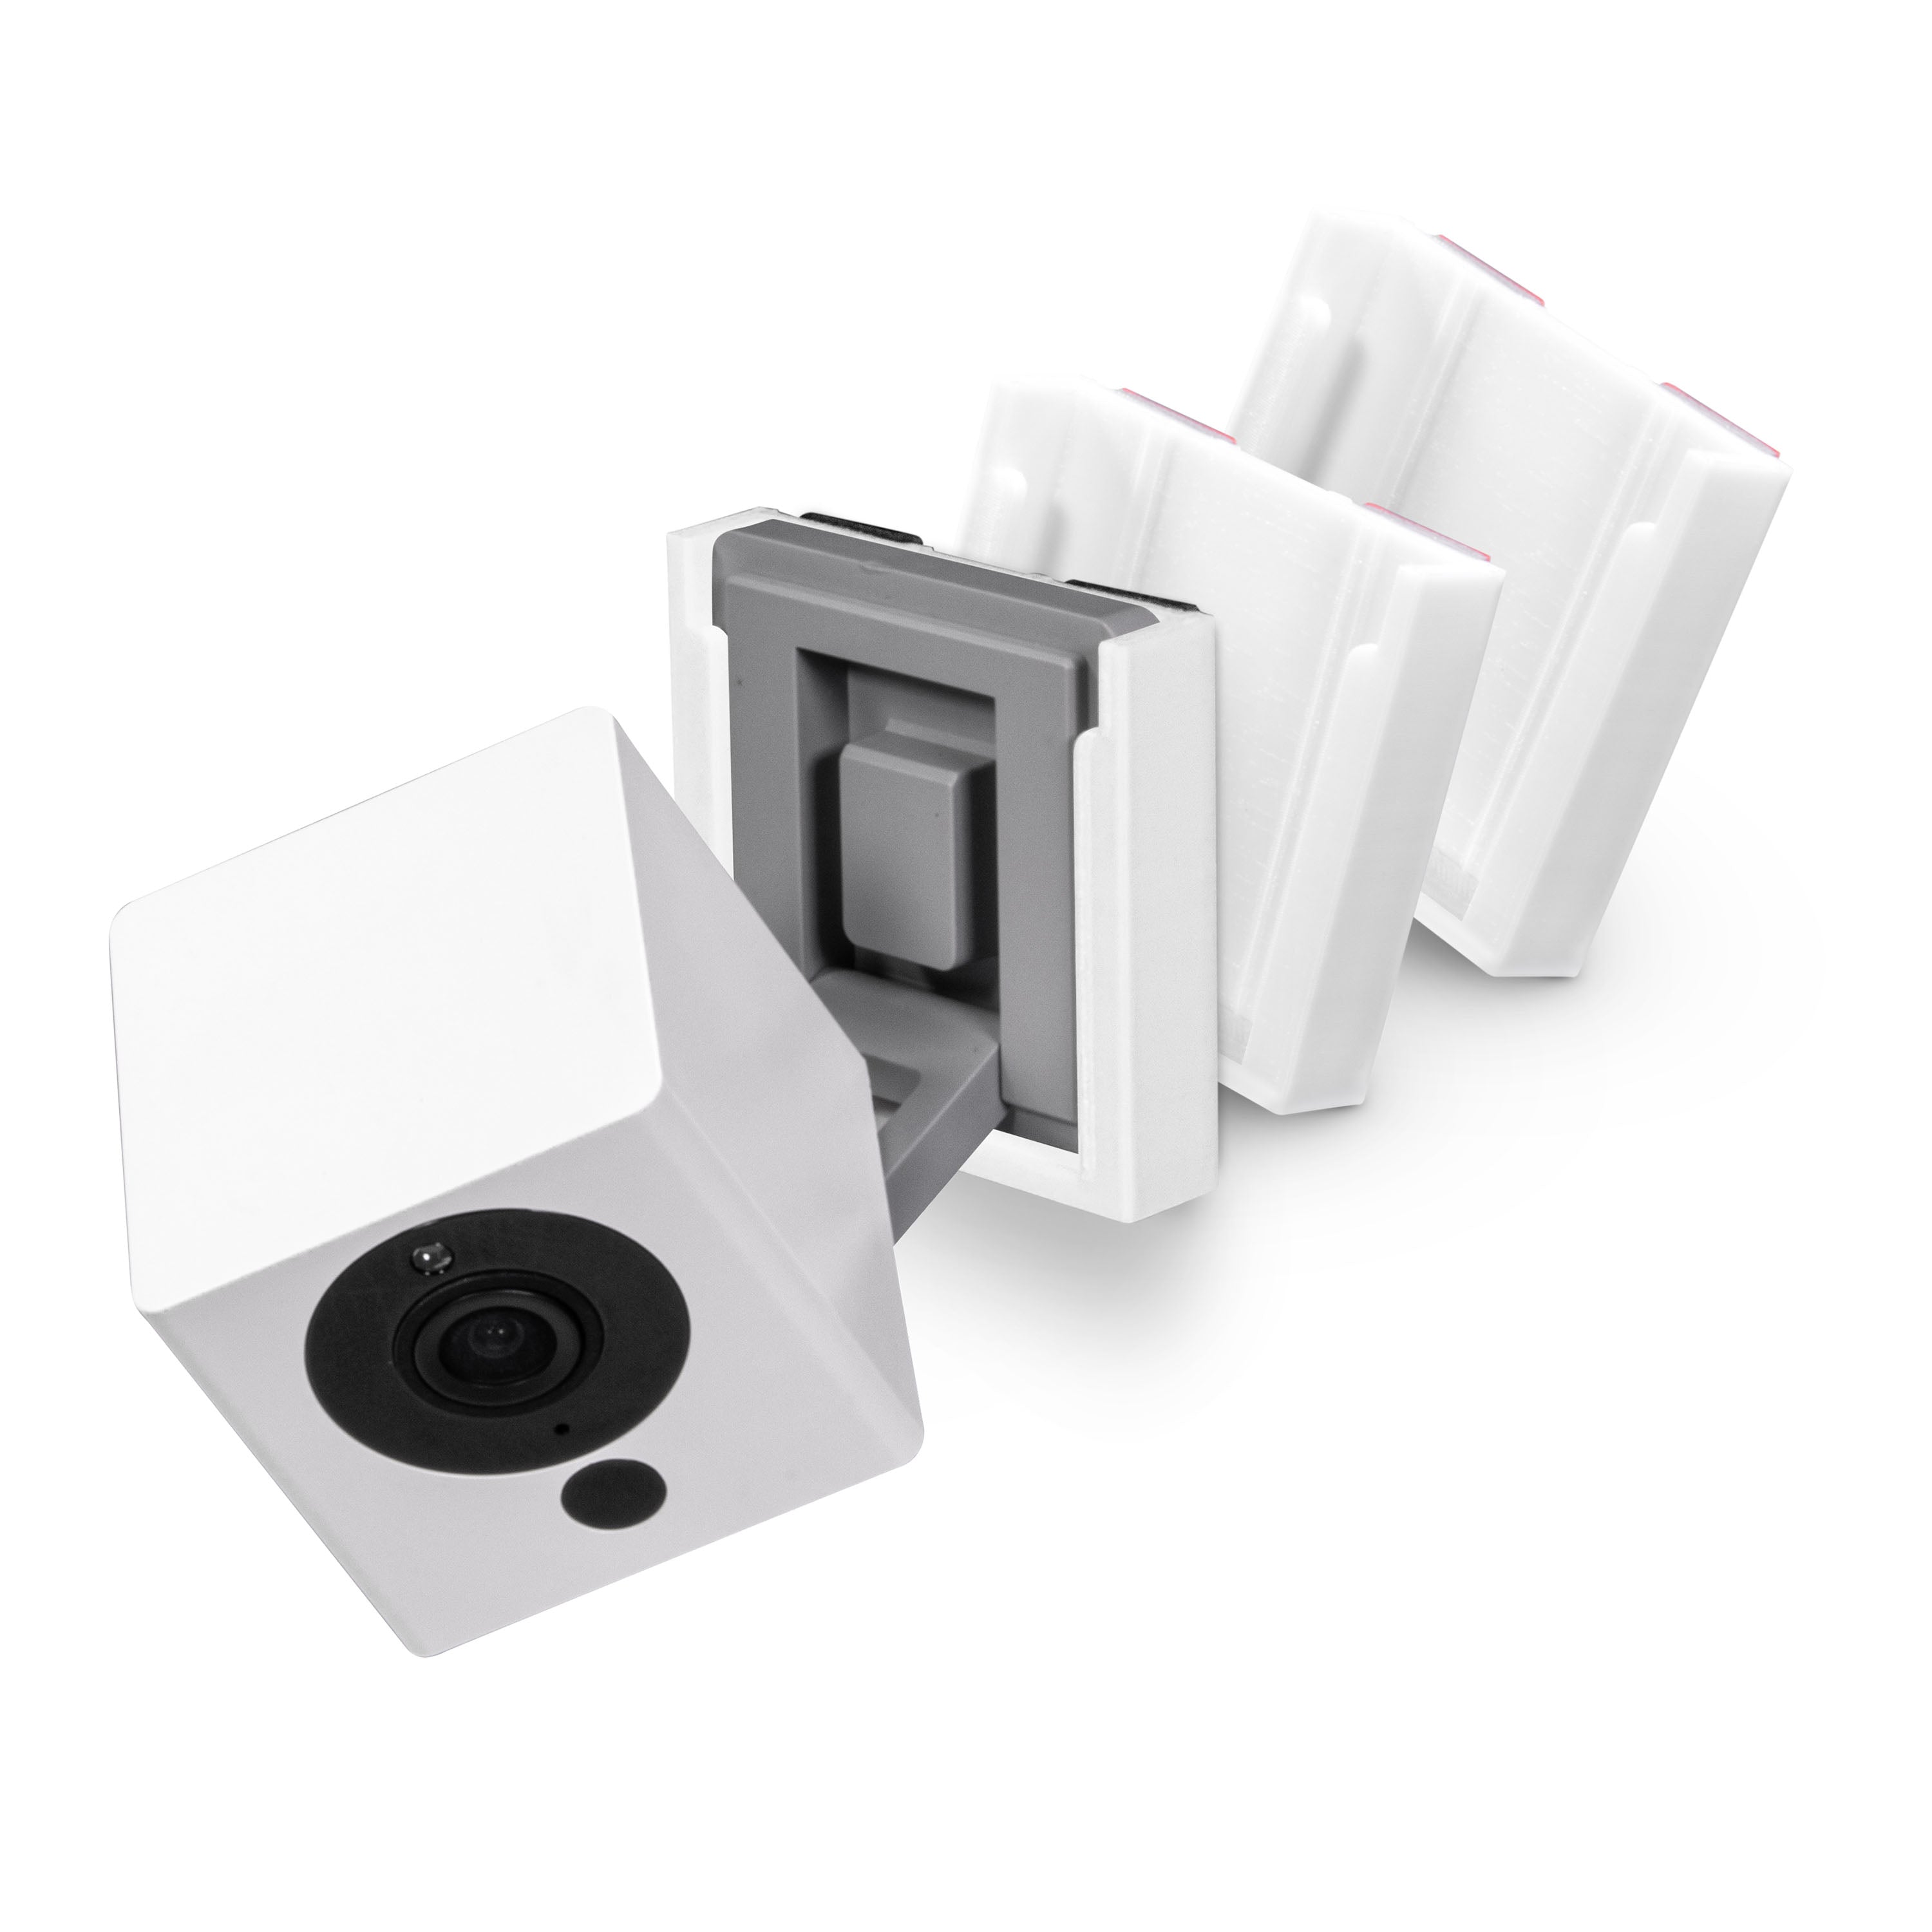  OLAIKE 2 Pack Outlet Wall Mount for Wyze Cam V2 & Wyze